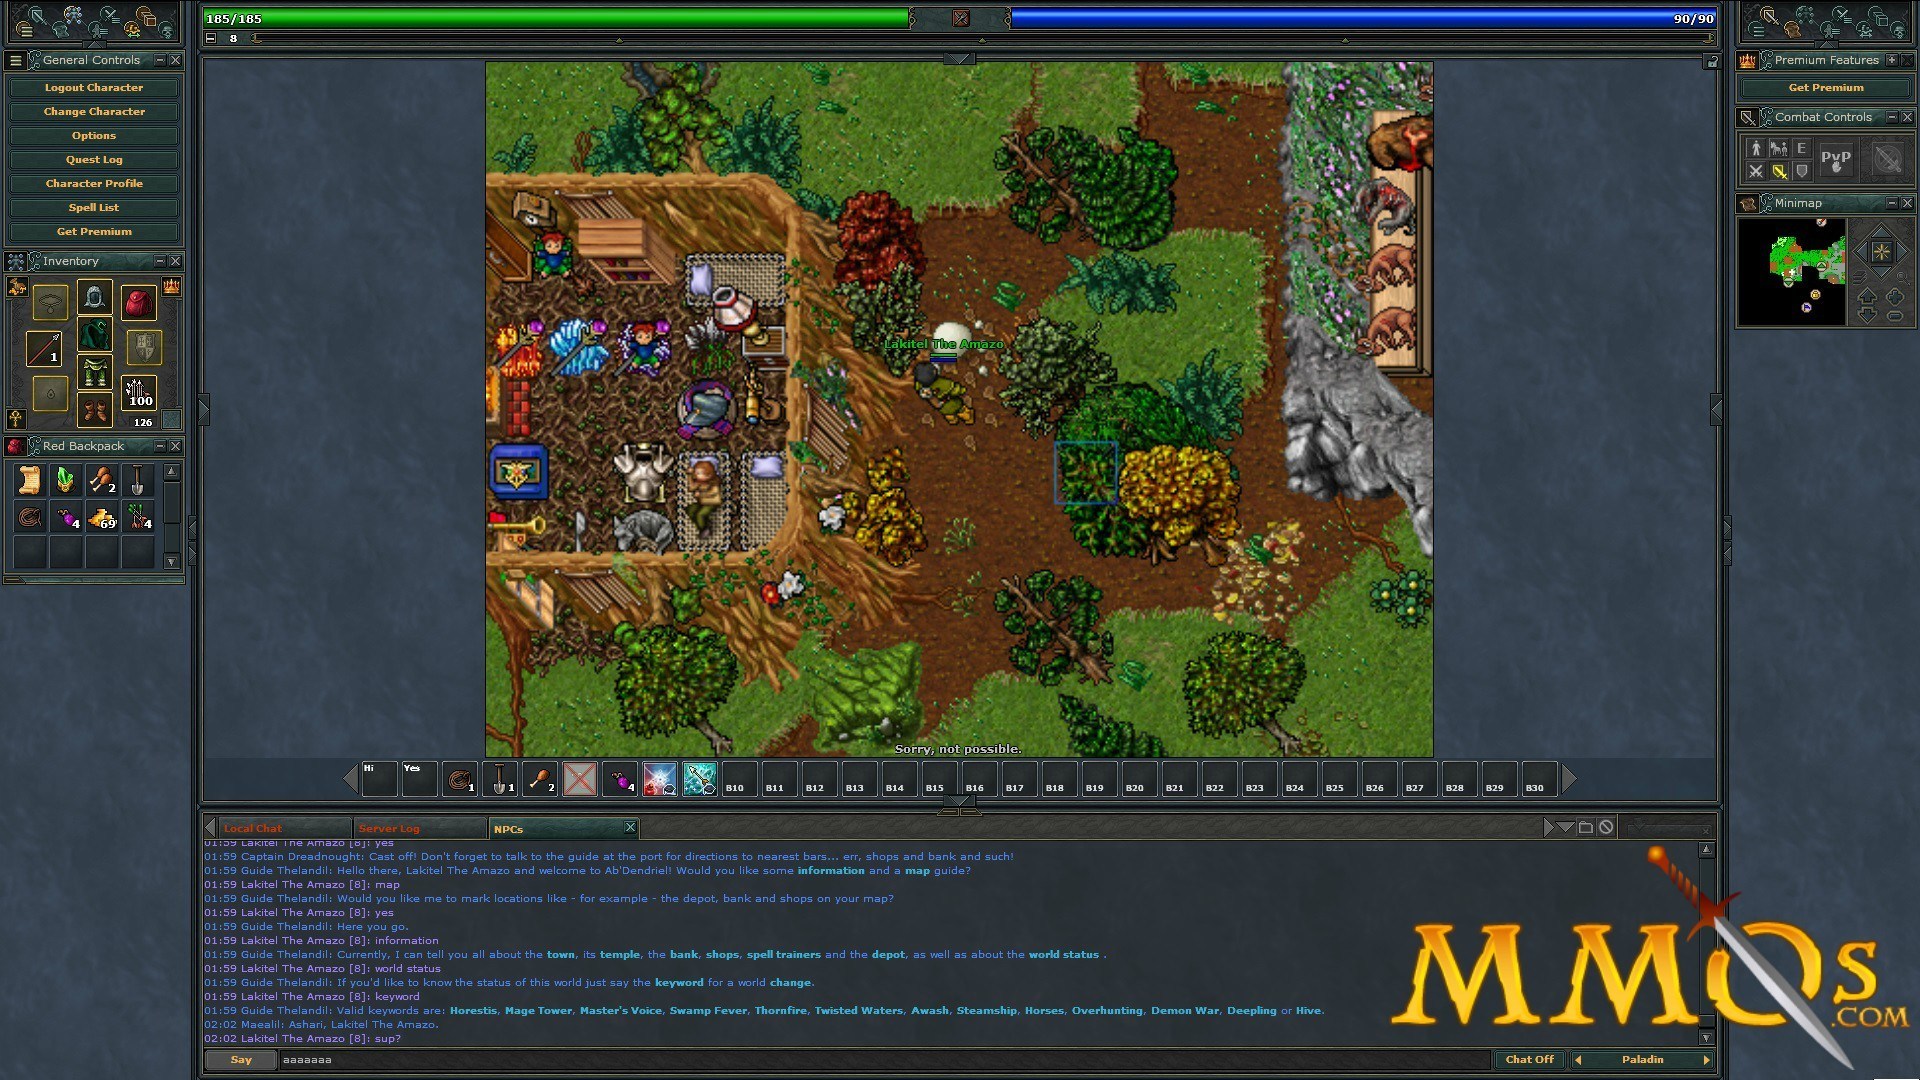 Tibia - Online Game of the Week